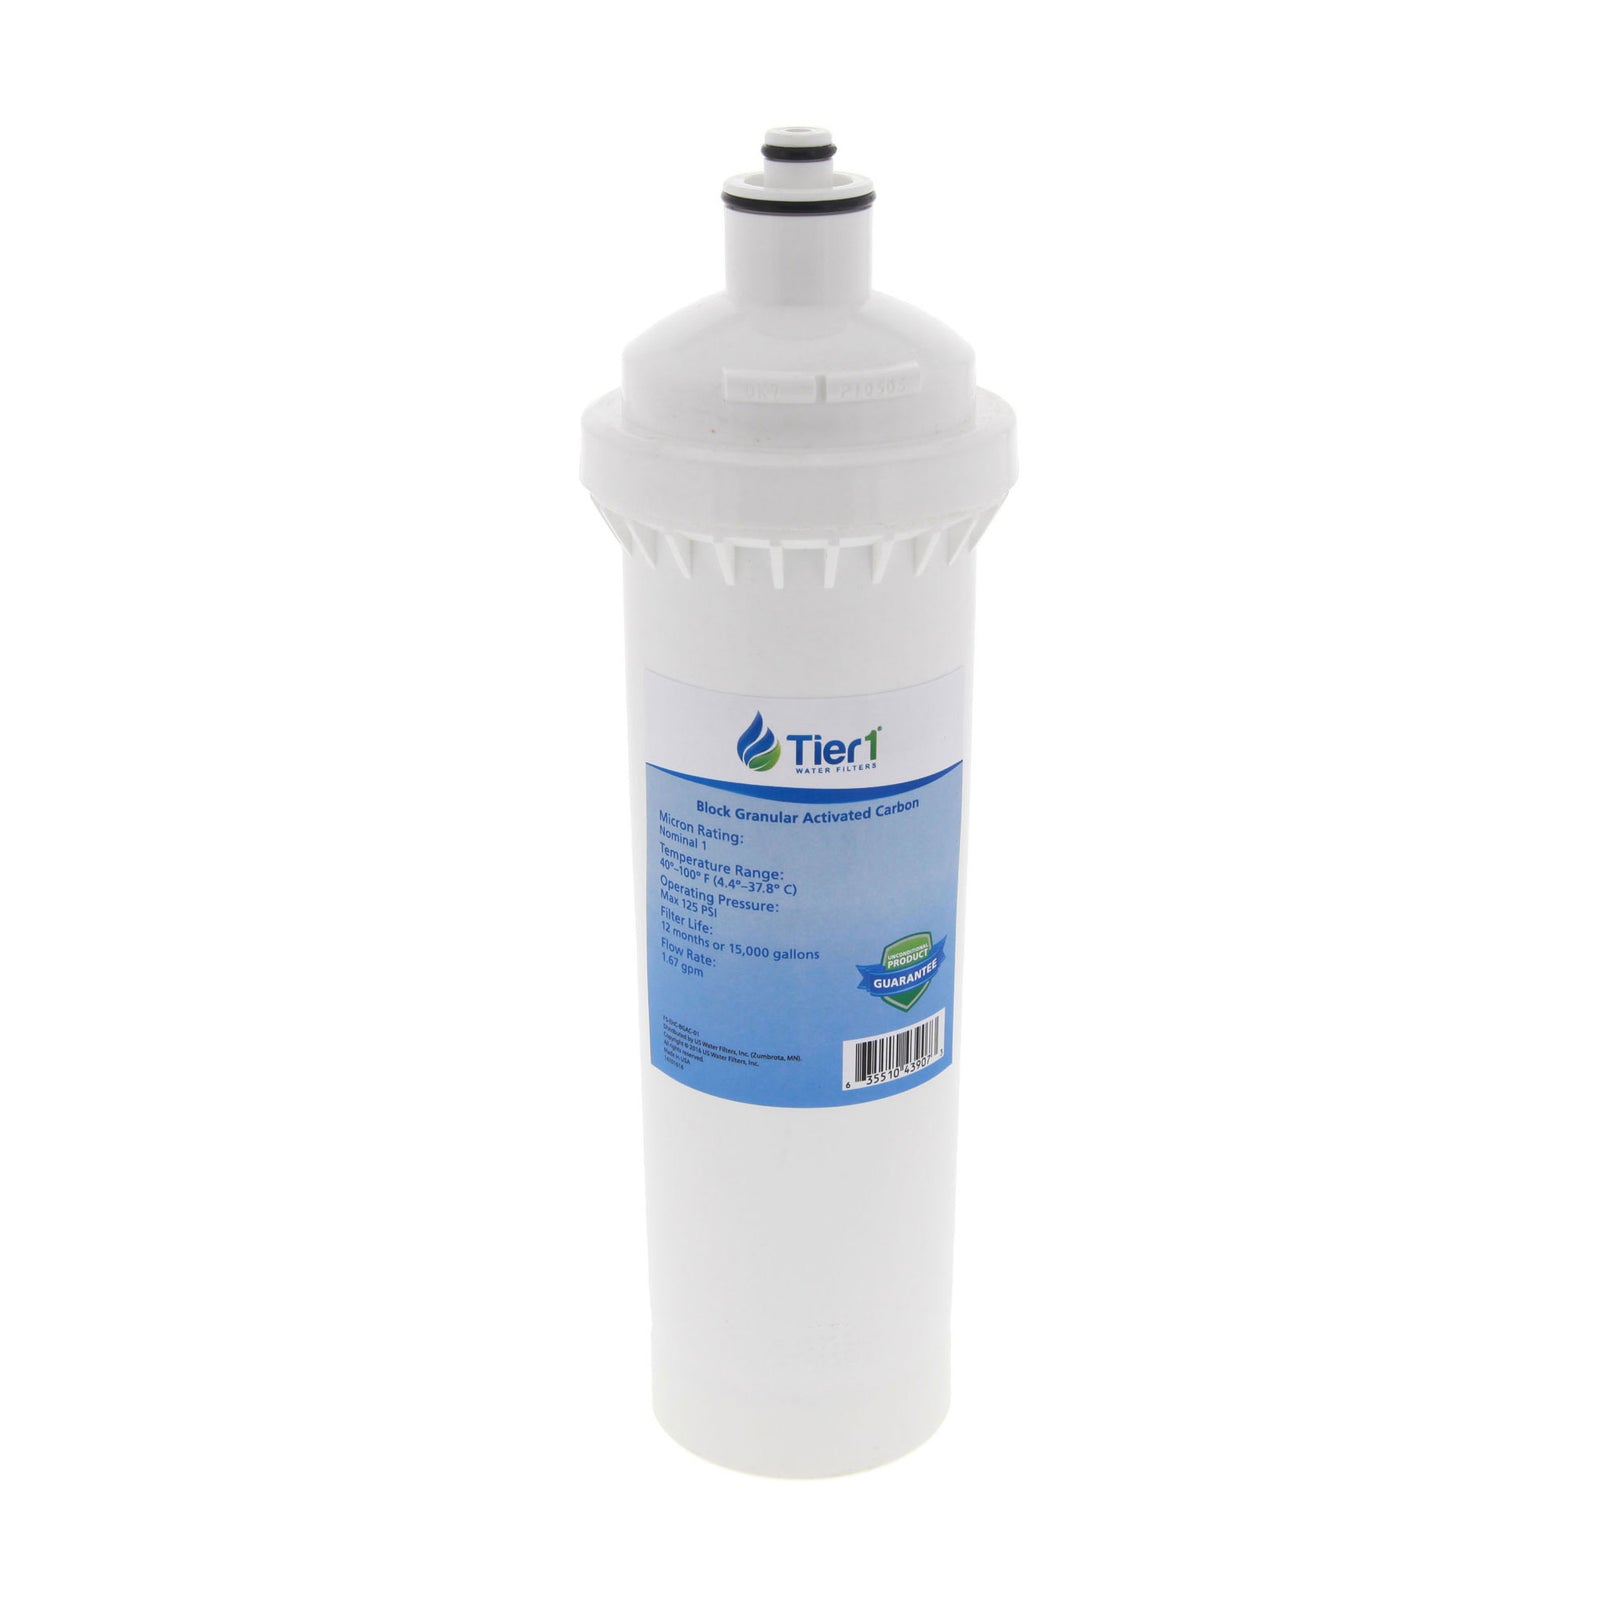 EV9720-06 Everpure Comparable Food Service Replacement Filter by Tier1